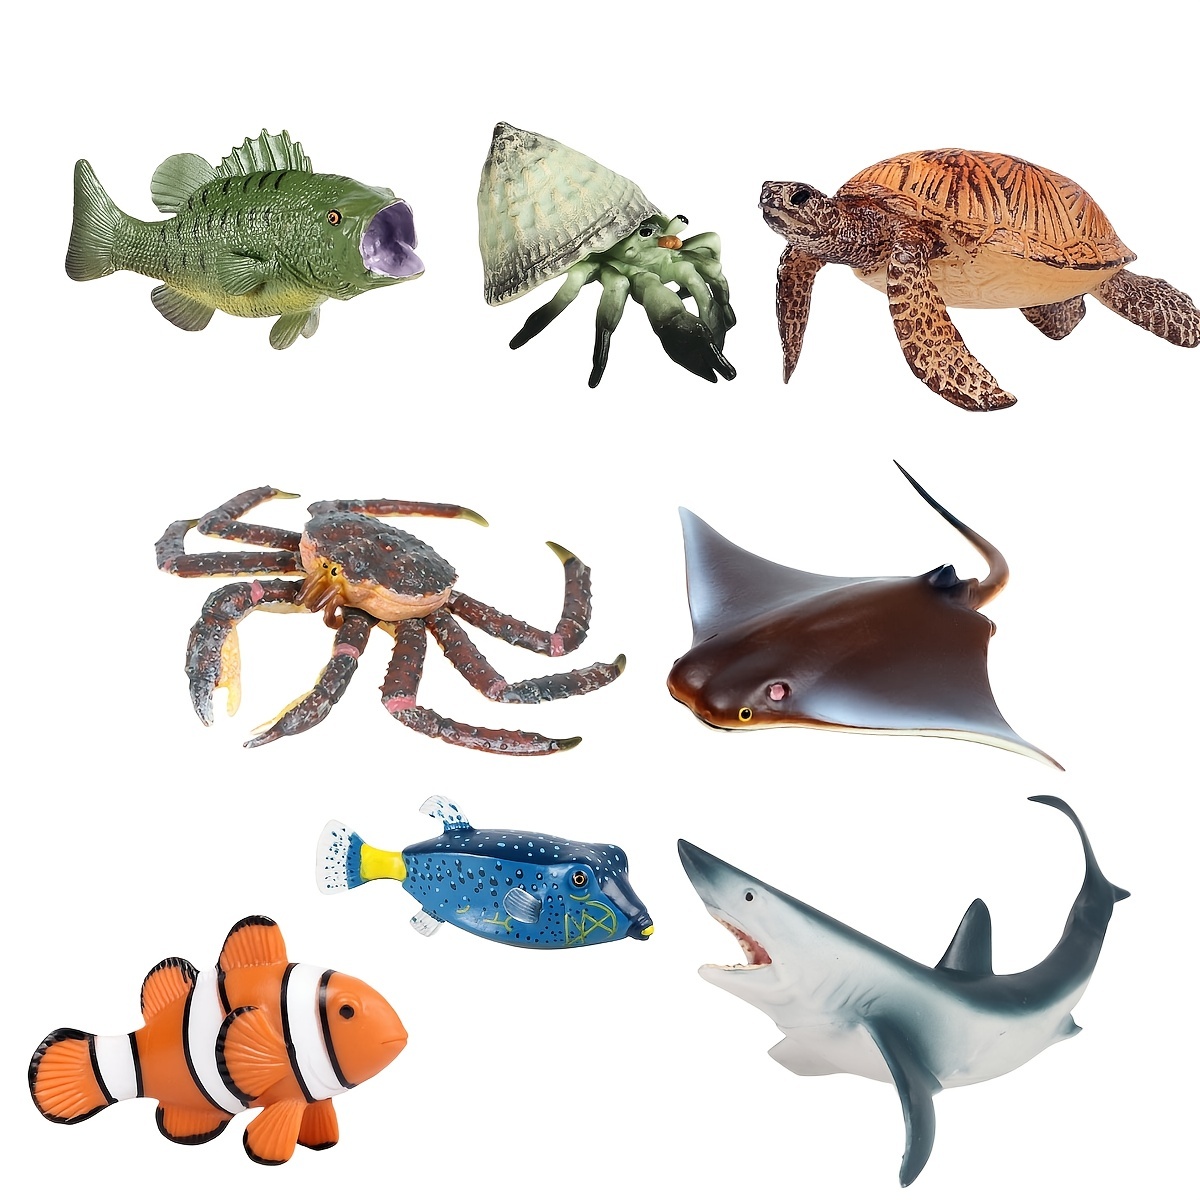  Warmtree Simulated Sea Life Animals Figurines Realistic Sea  Creature Model Plastic Ocean Animals Action Figure for Collection  (Horseshoe Crab) : Toys & Games